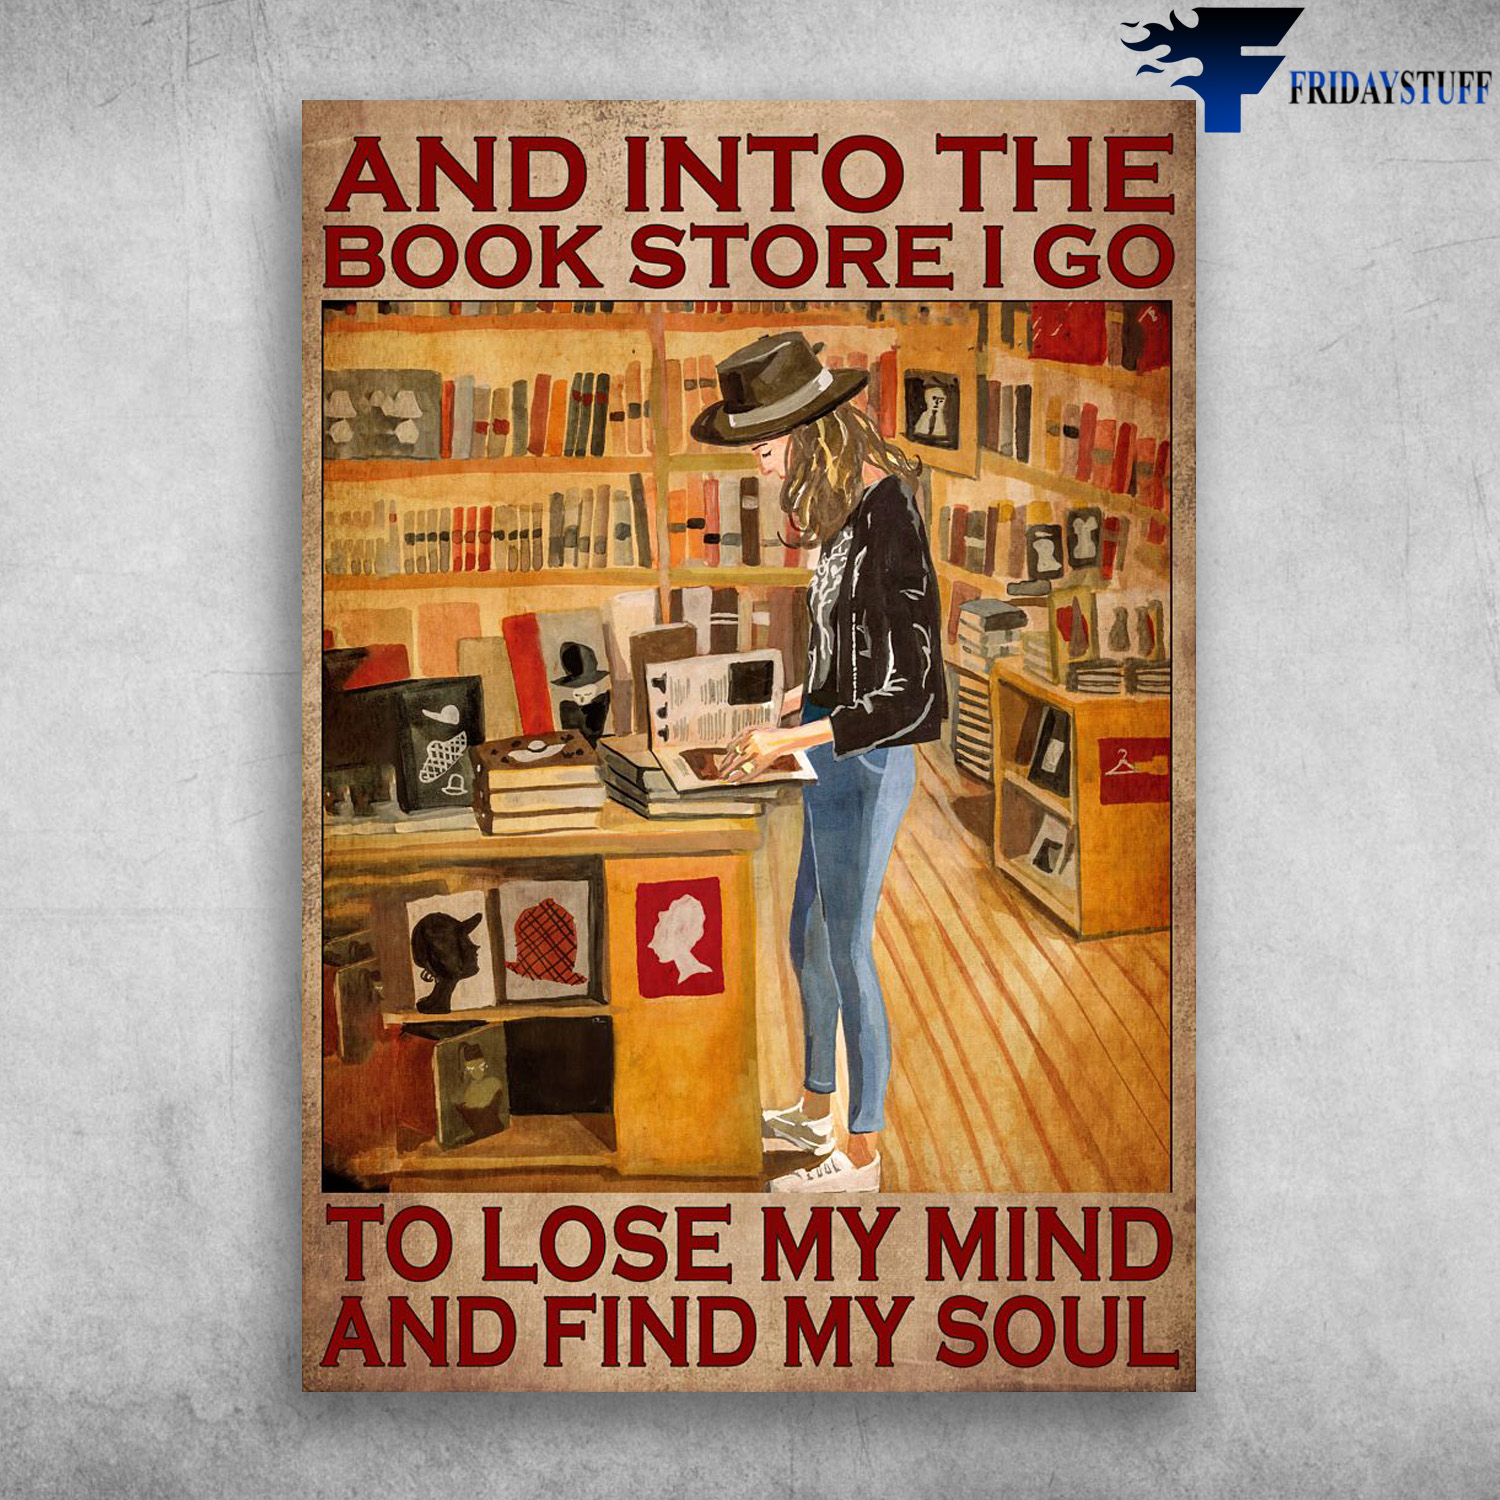 Girl Loves Book, Book Store - And Into The Books Store, I Go To Lose My Mind, And Find My Soul